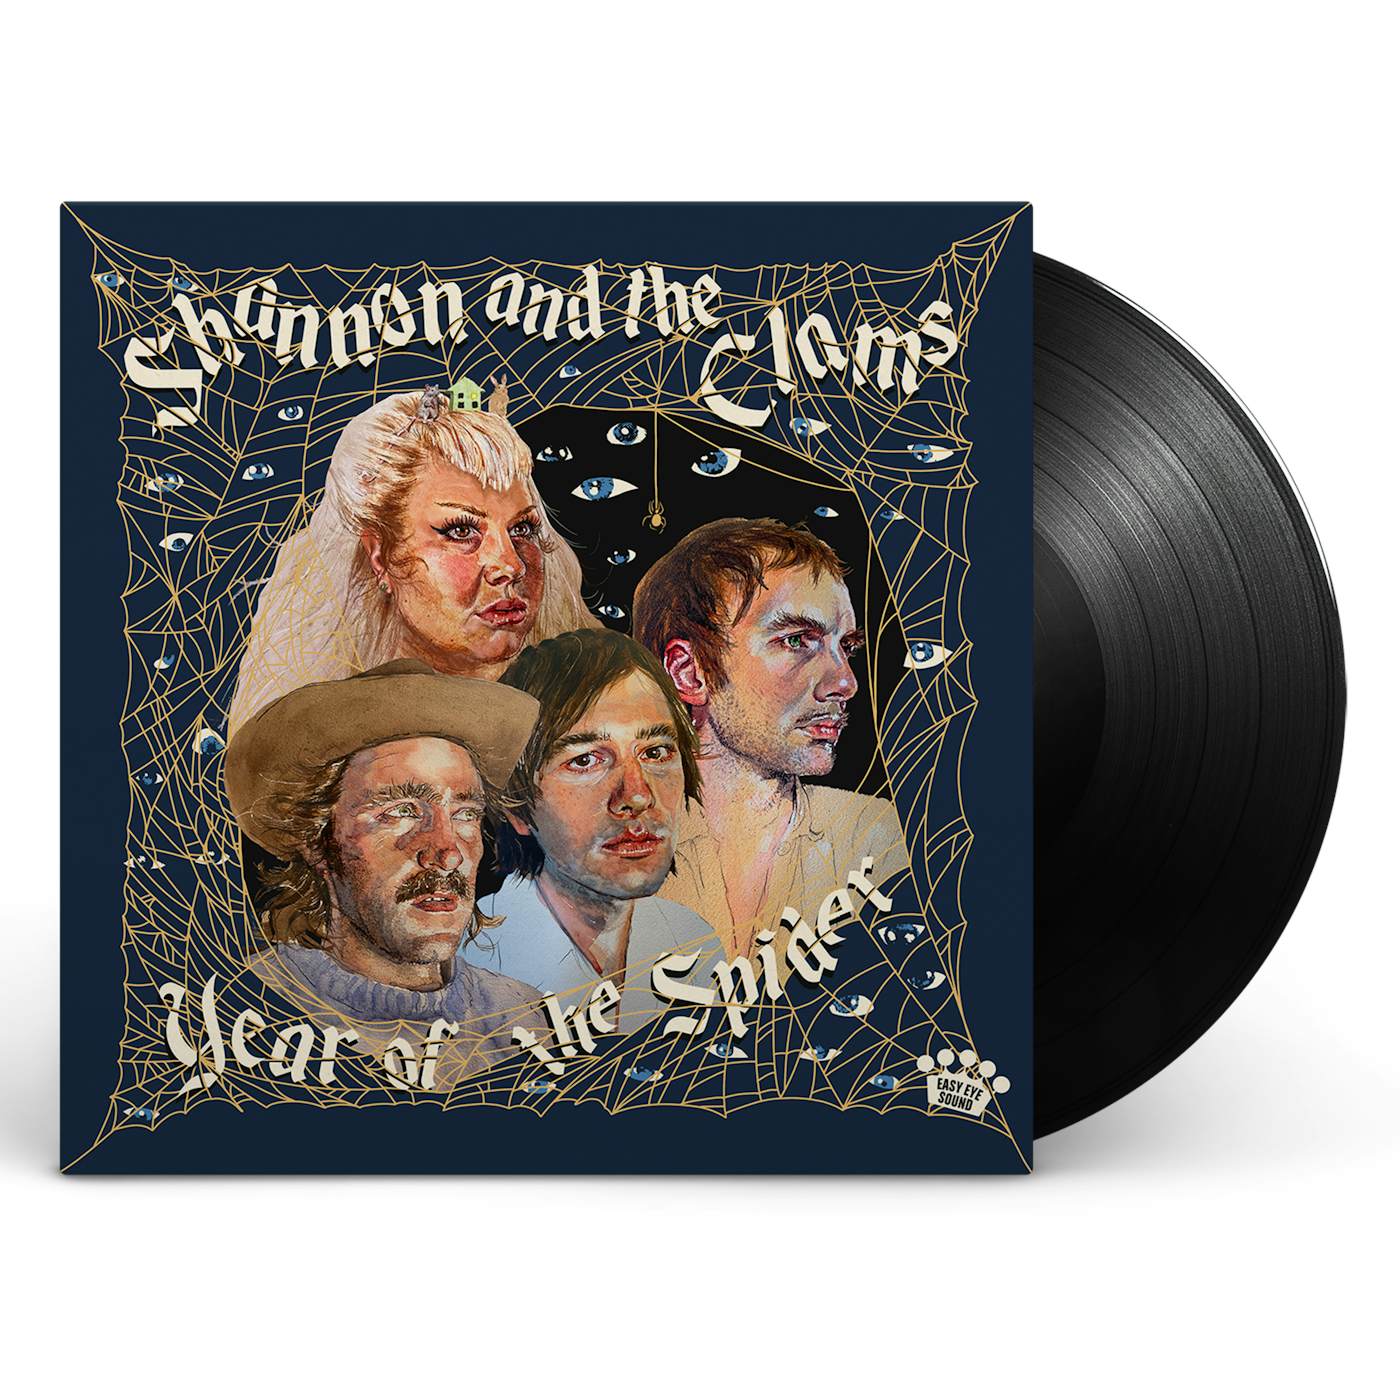 Shannon & The Clams - Year Of The Spider Vinyl